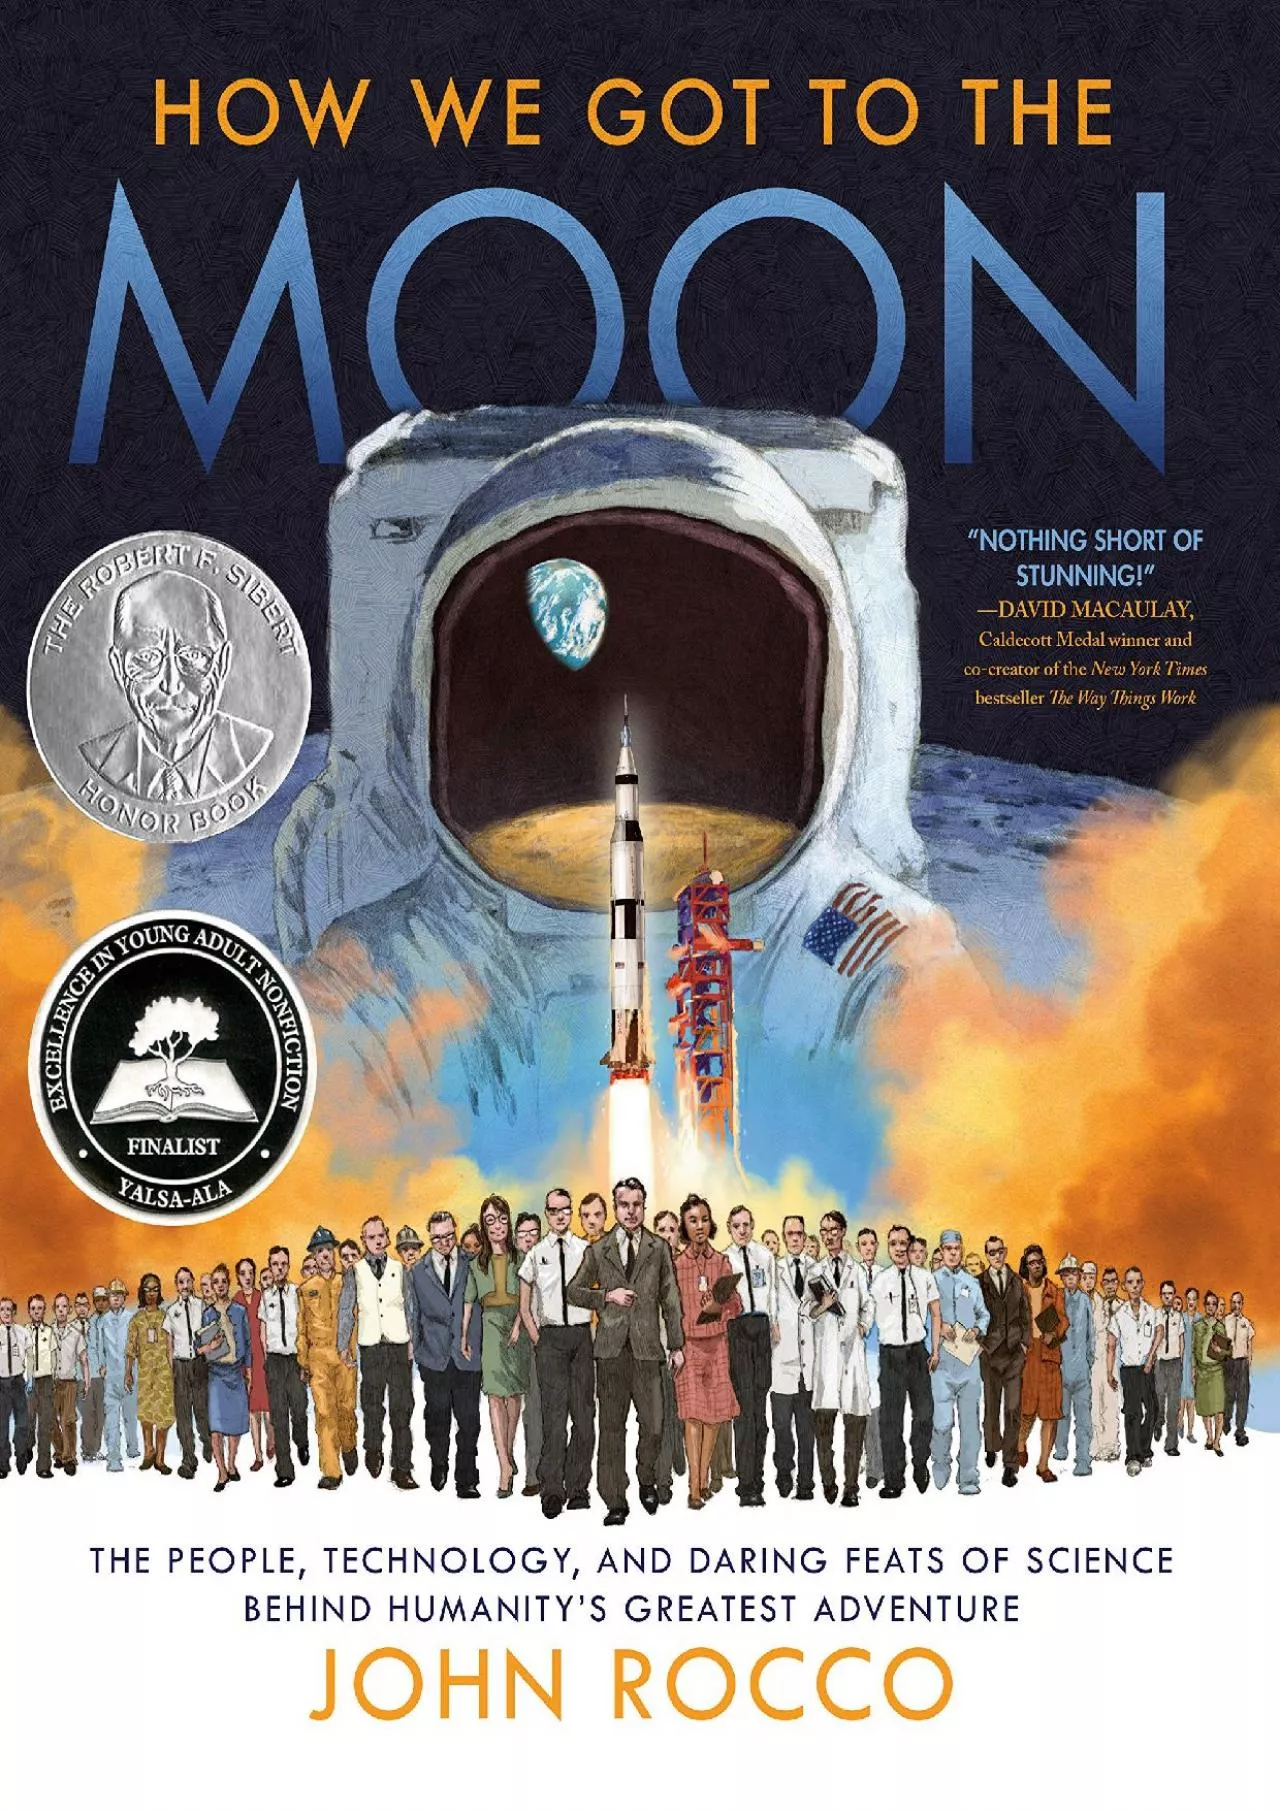 (DOWNLOAD)-How We Got to the Moon: The People, Technology, and Daring Feats of Science